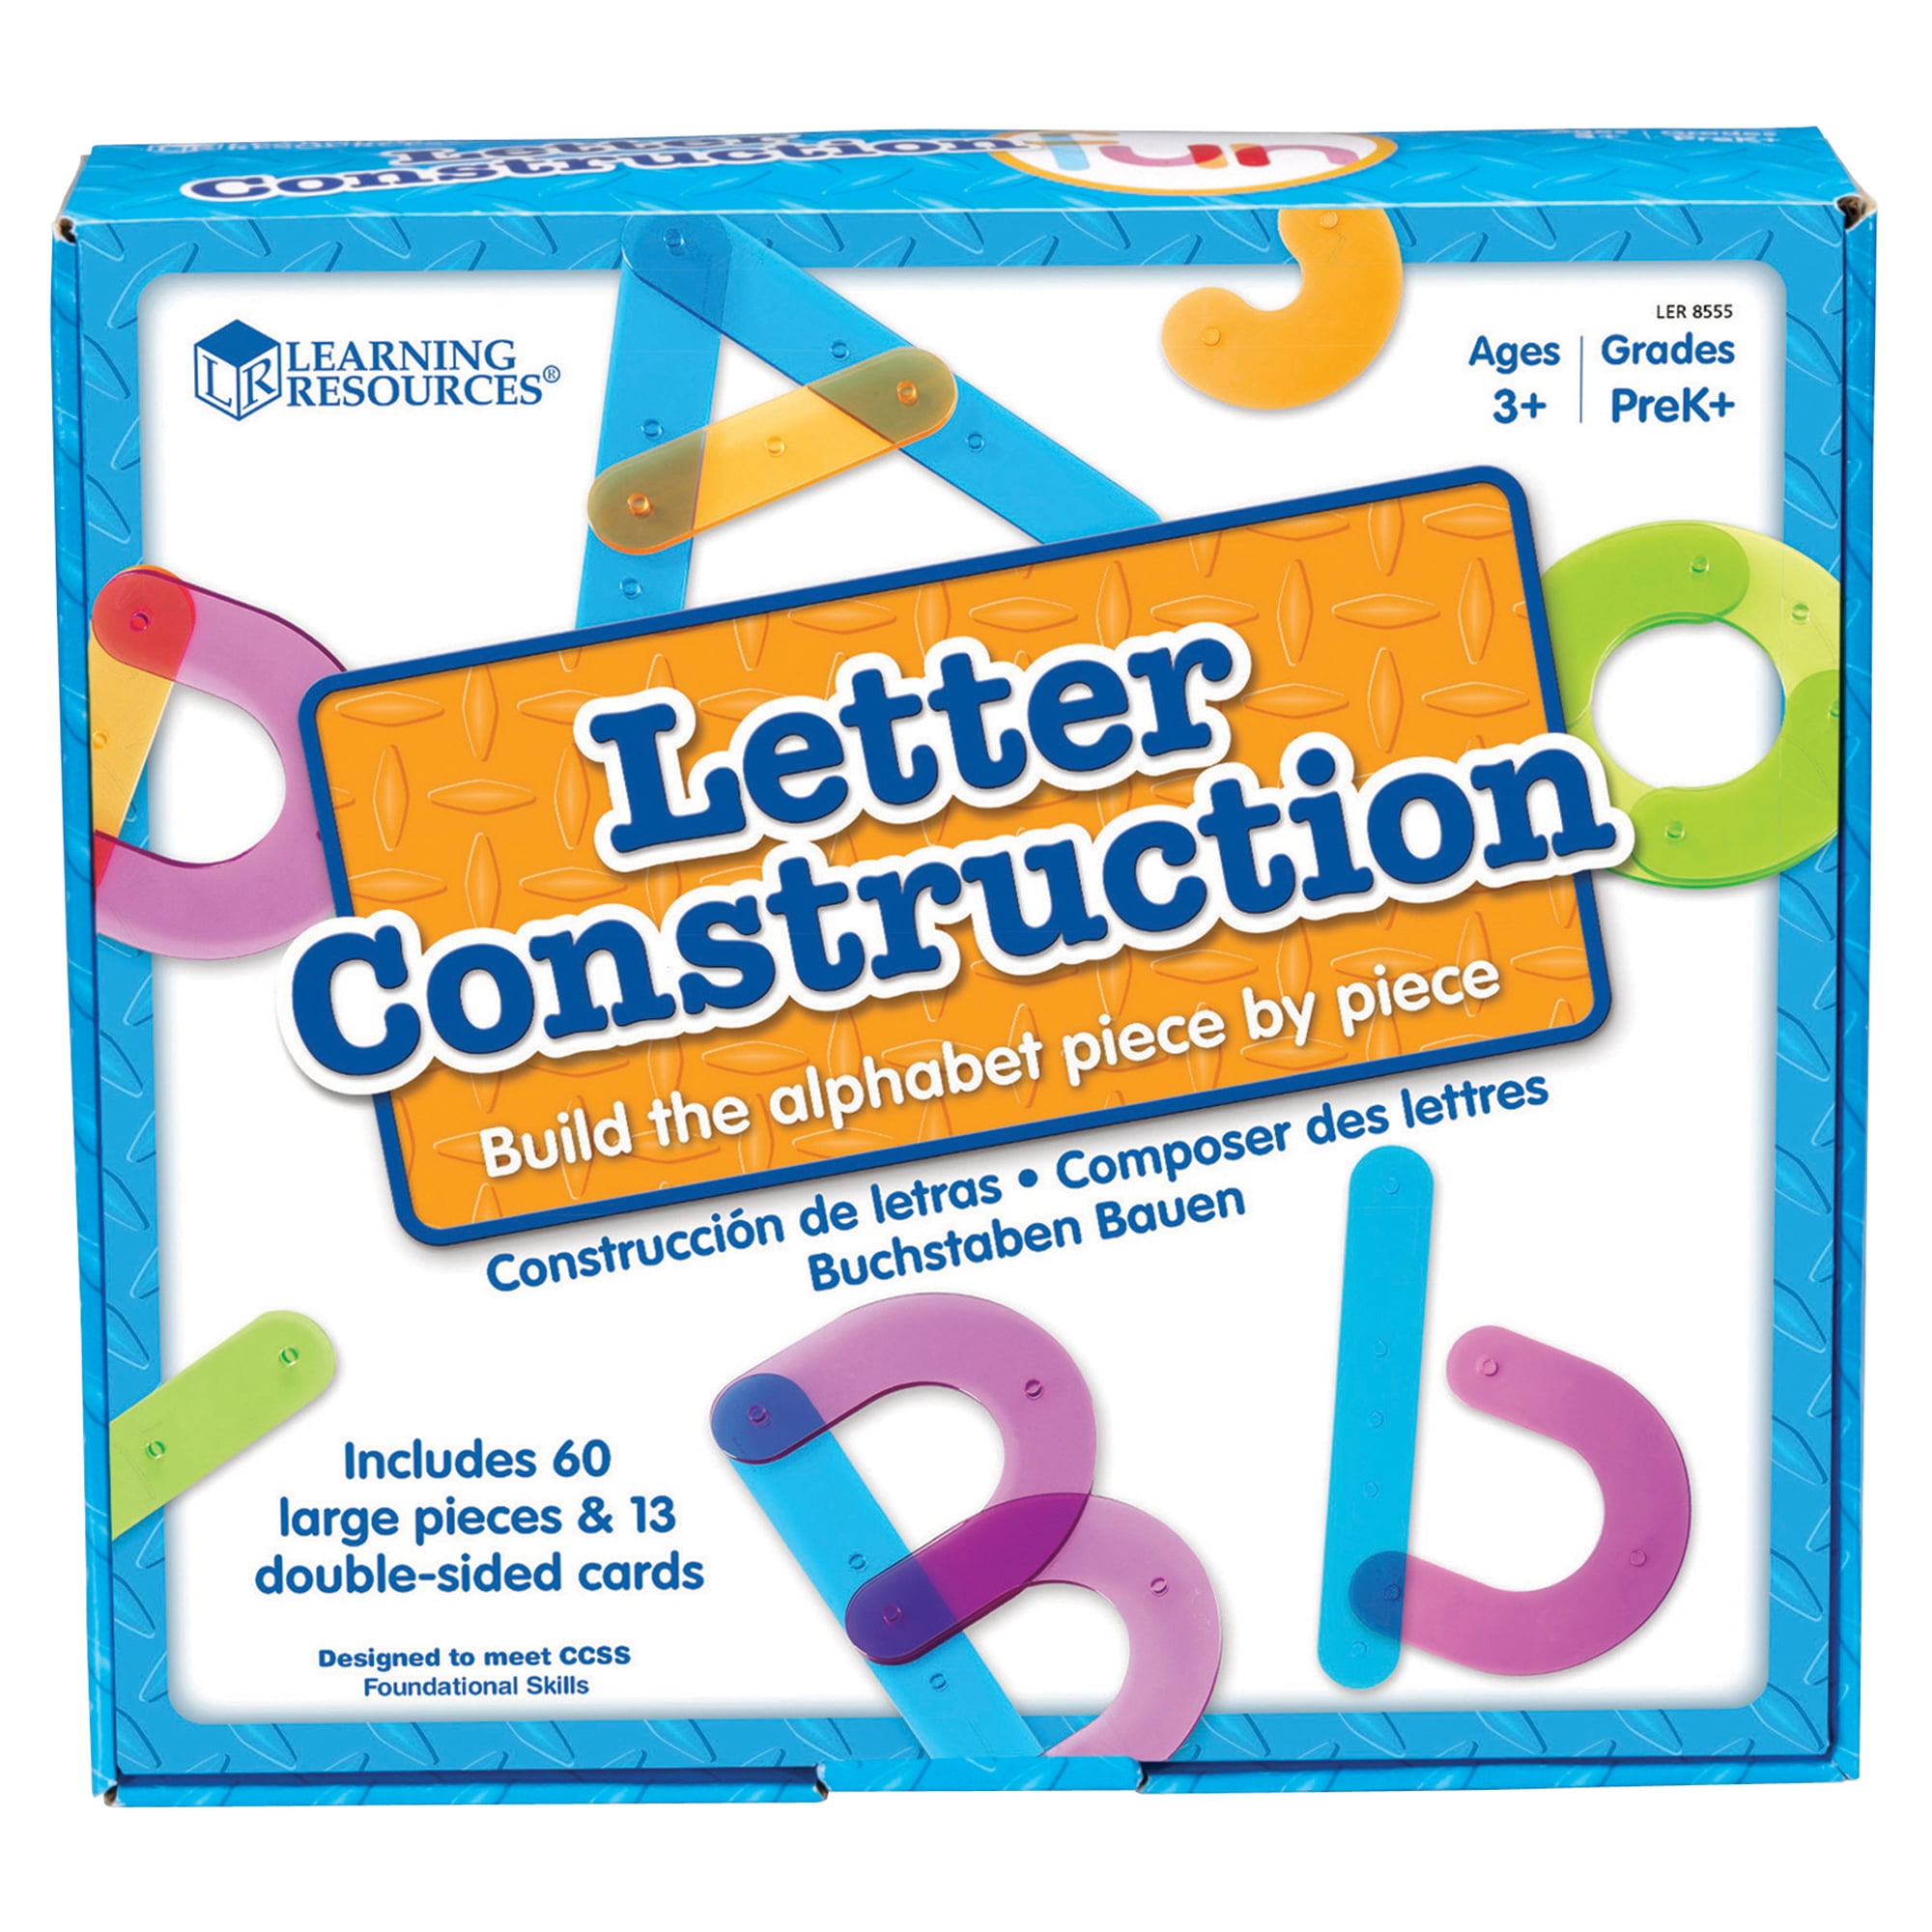 Educational Insights Alphabet Rubber Stamps - Uppercase 5/8, Set of 26  Letters and 4 Punctuation Marks: Perfect for Homeschool & Classroom, Ages 4+